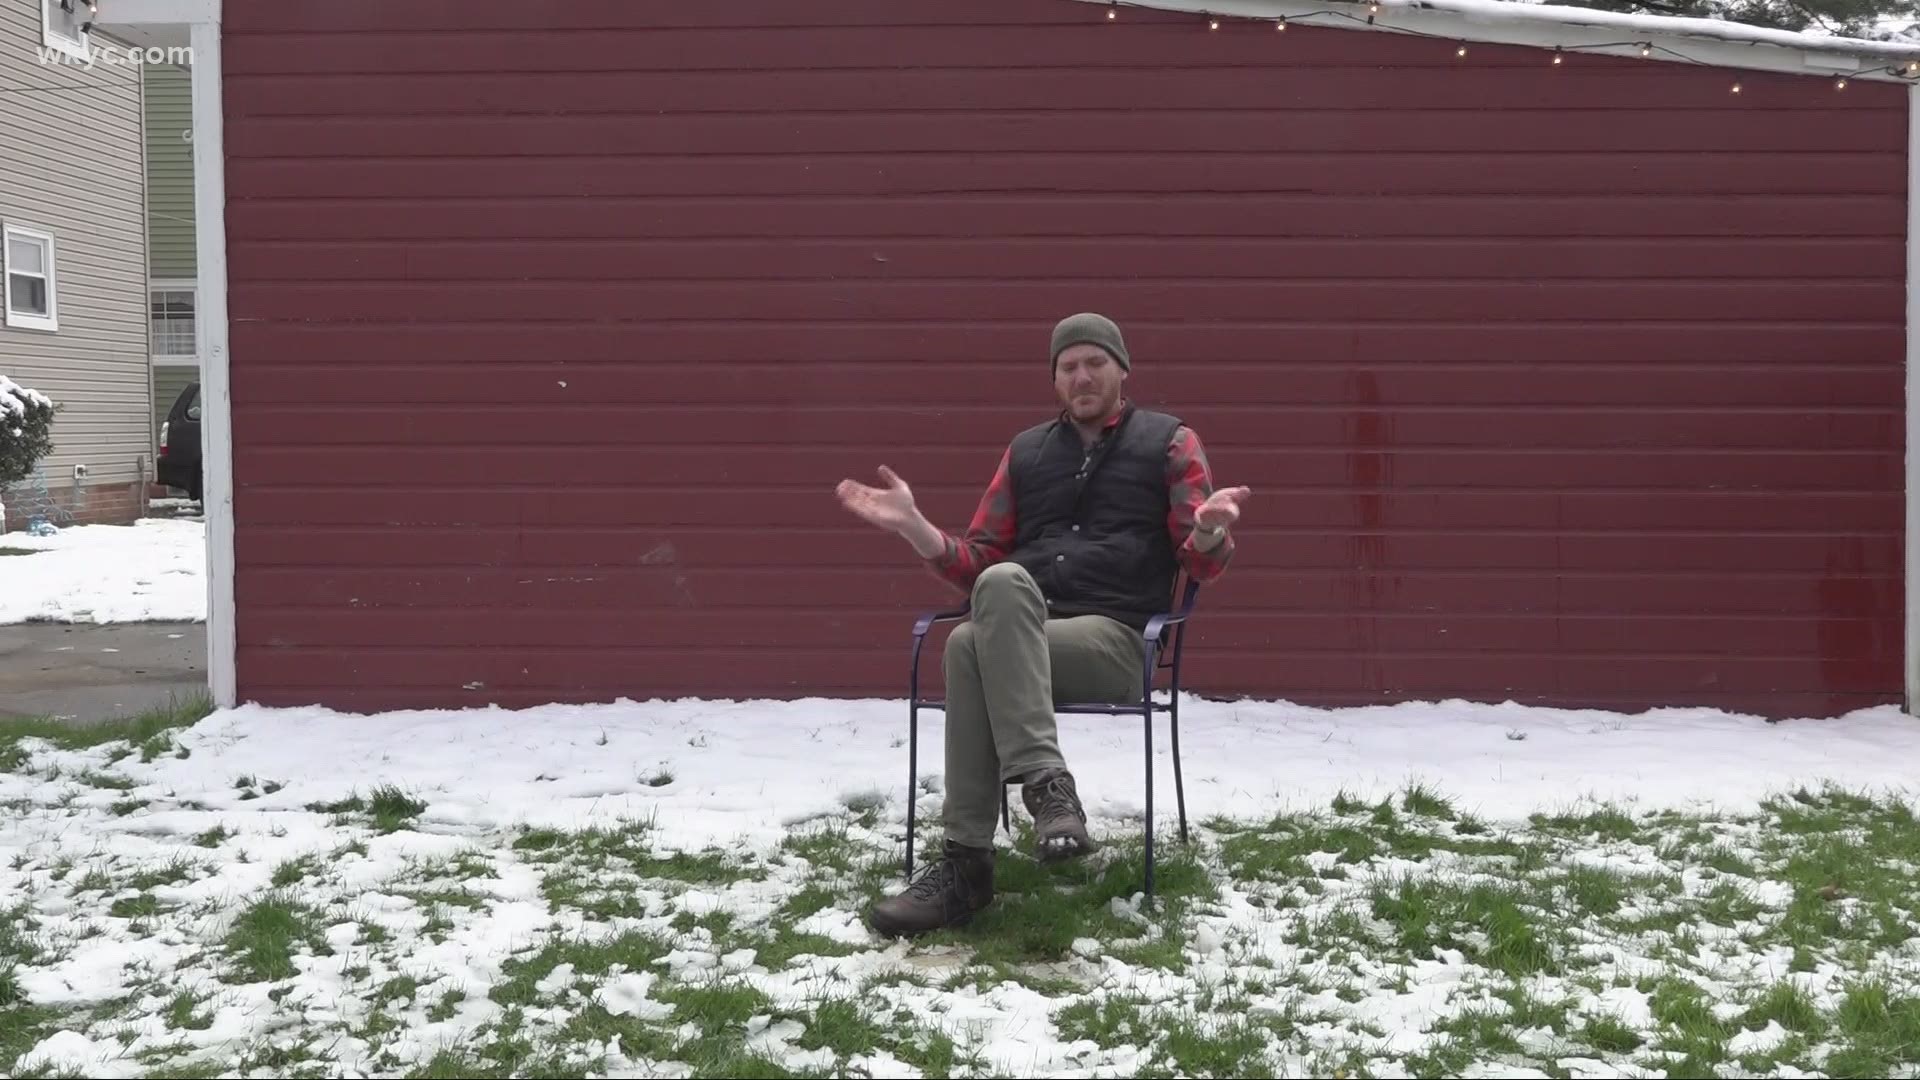 Spring snow and complaining about weather is nothing new for northeast Ohioans. Mike Polk Jr. shares his thoughts.